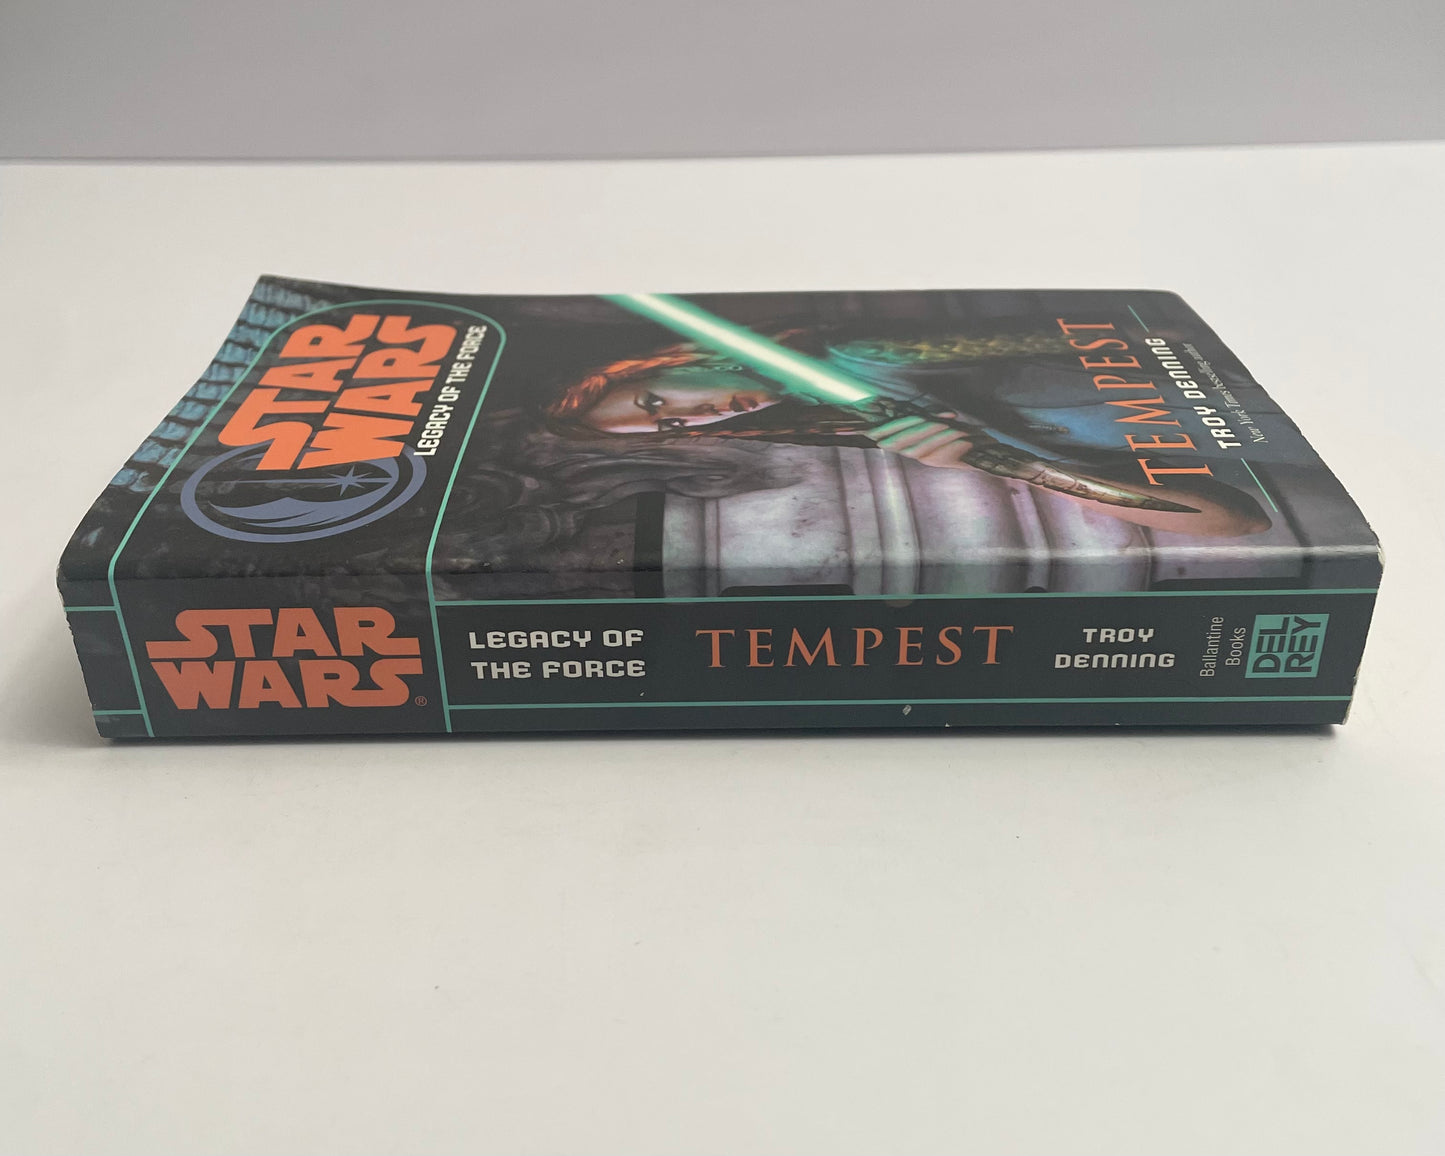 Star Wars Legacy Of The Force: Tempest